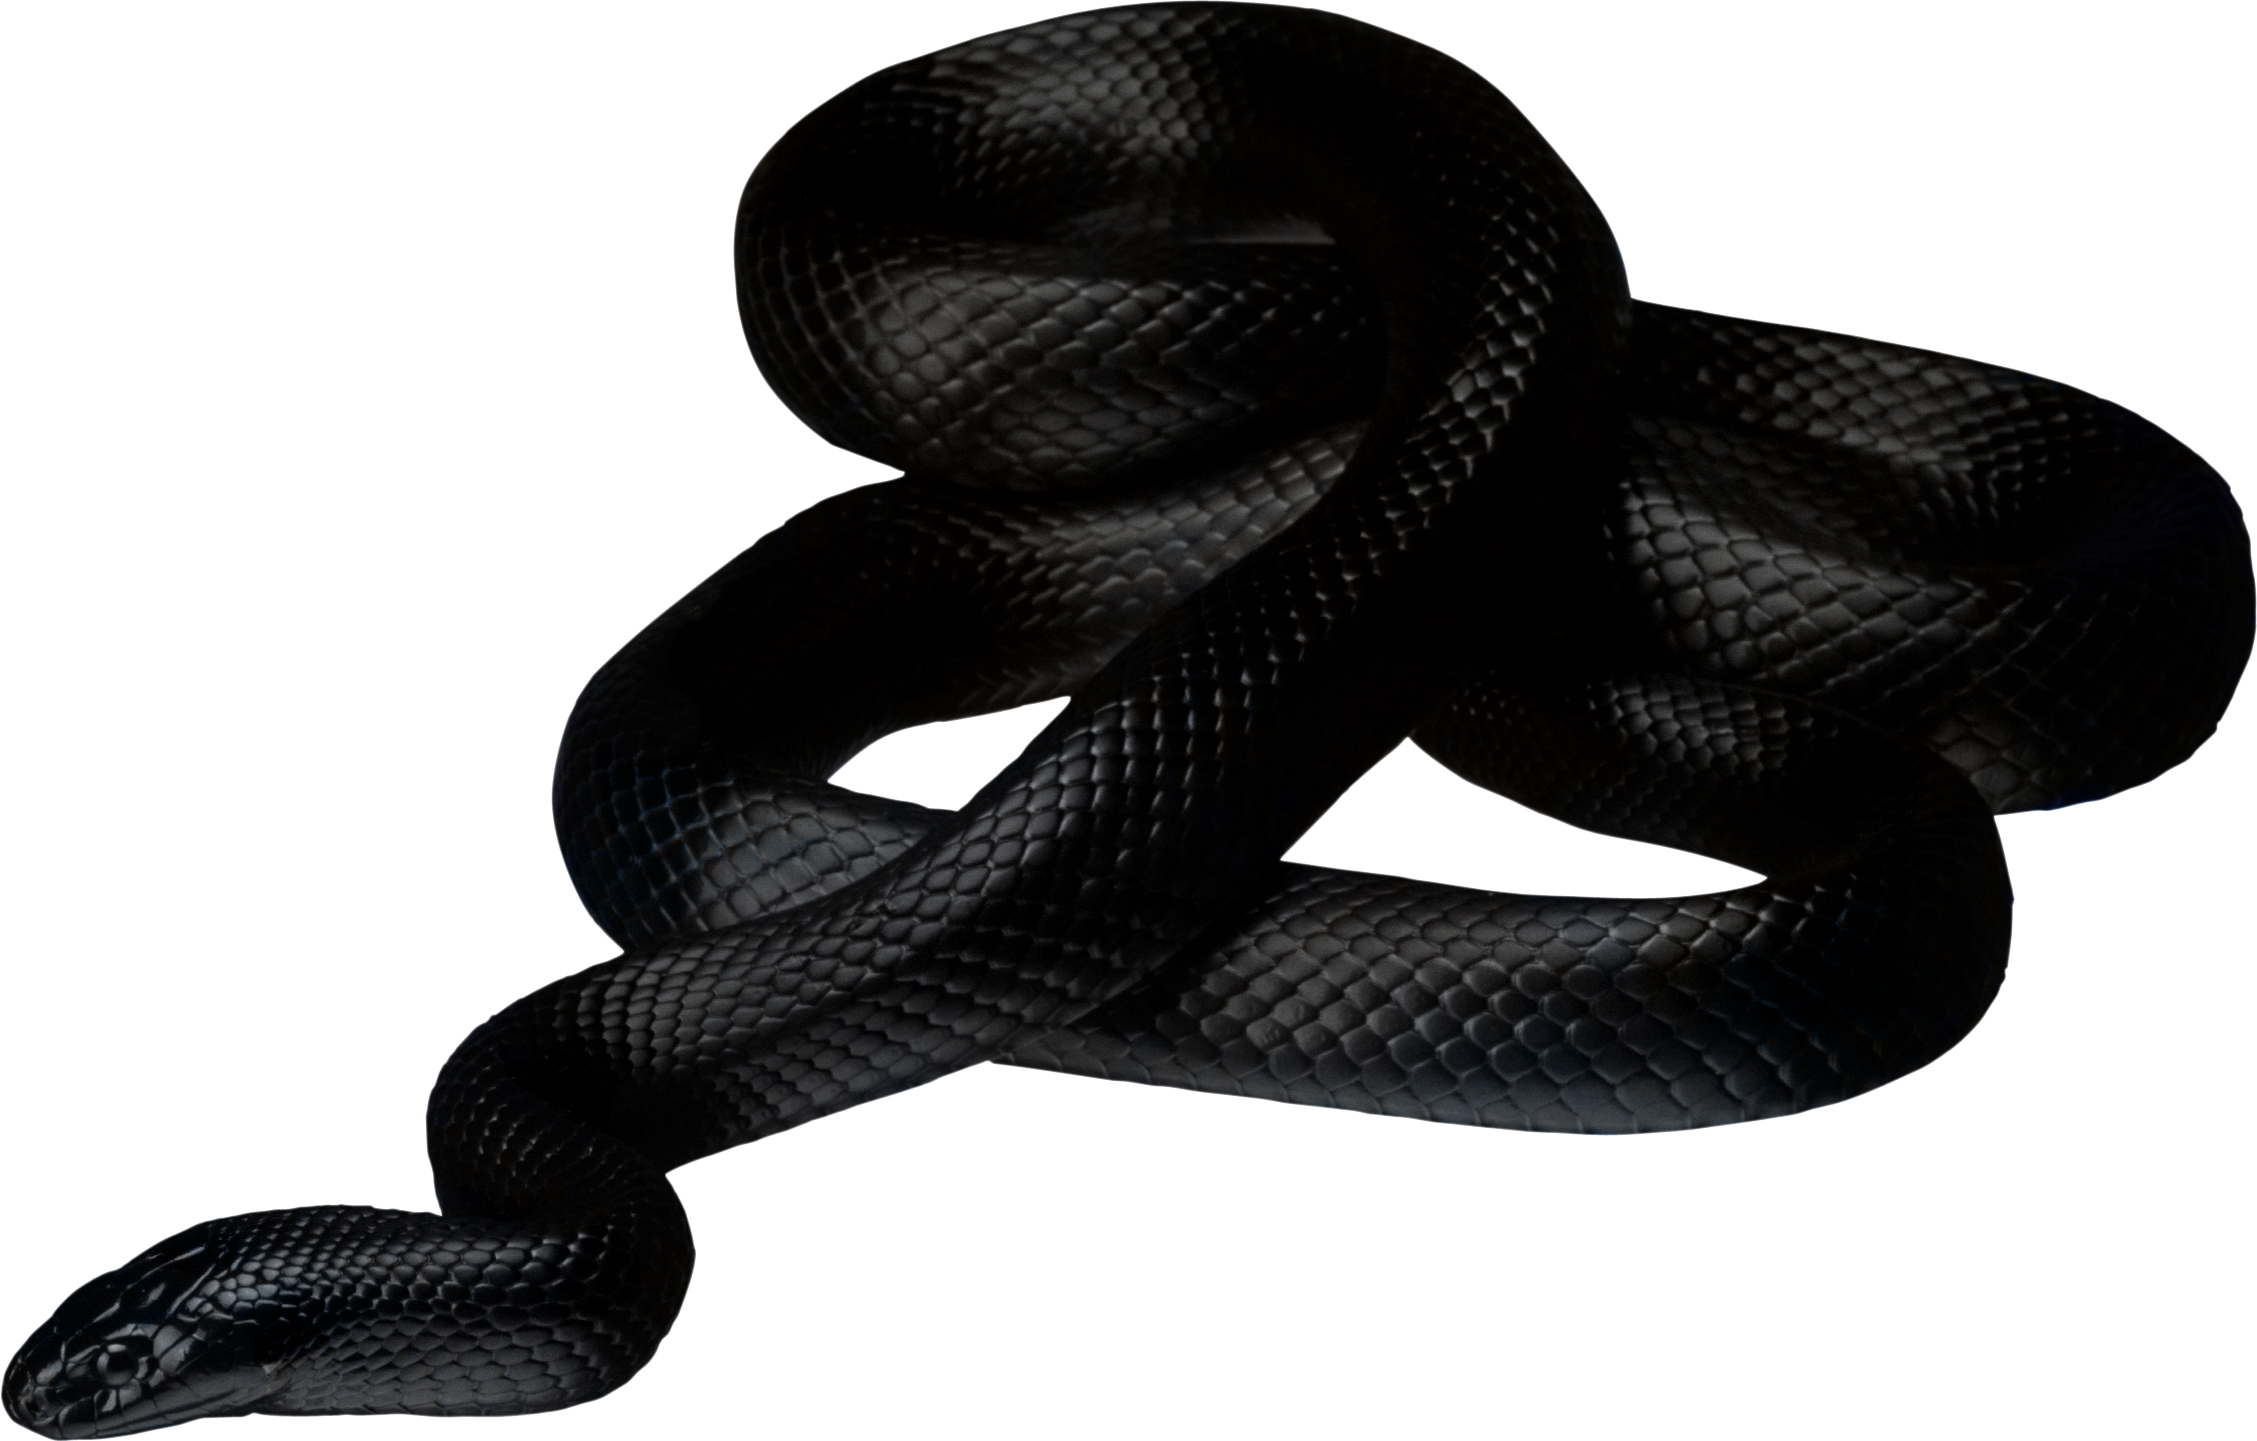 snake_PNG4085.png 